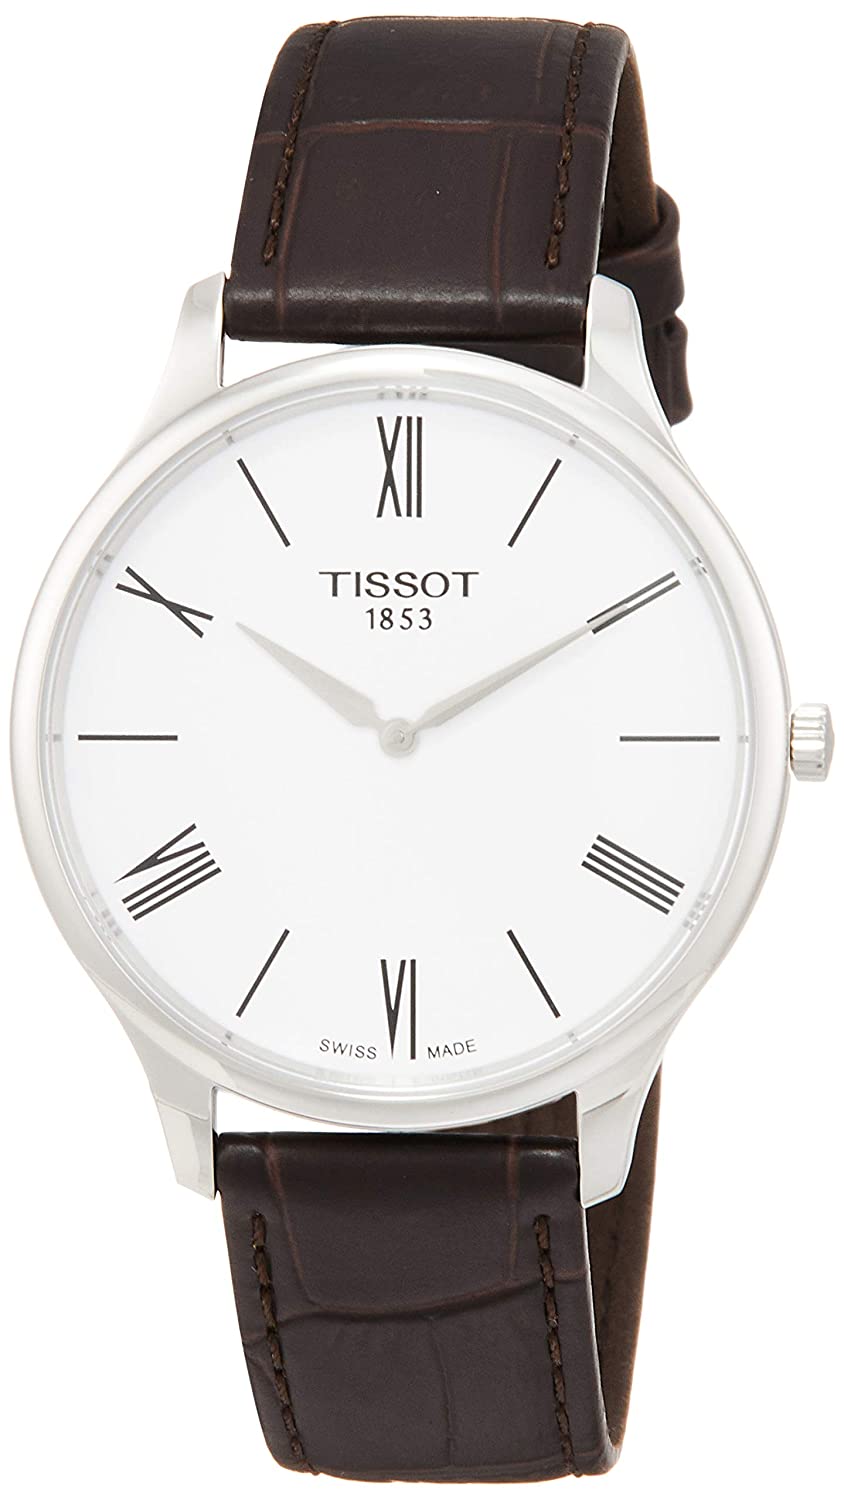 Tissot Tradition 5.5 Brown Leather Strap Watch